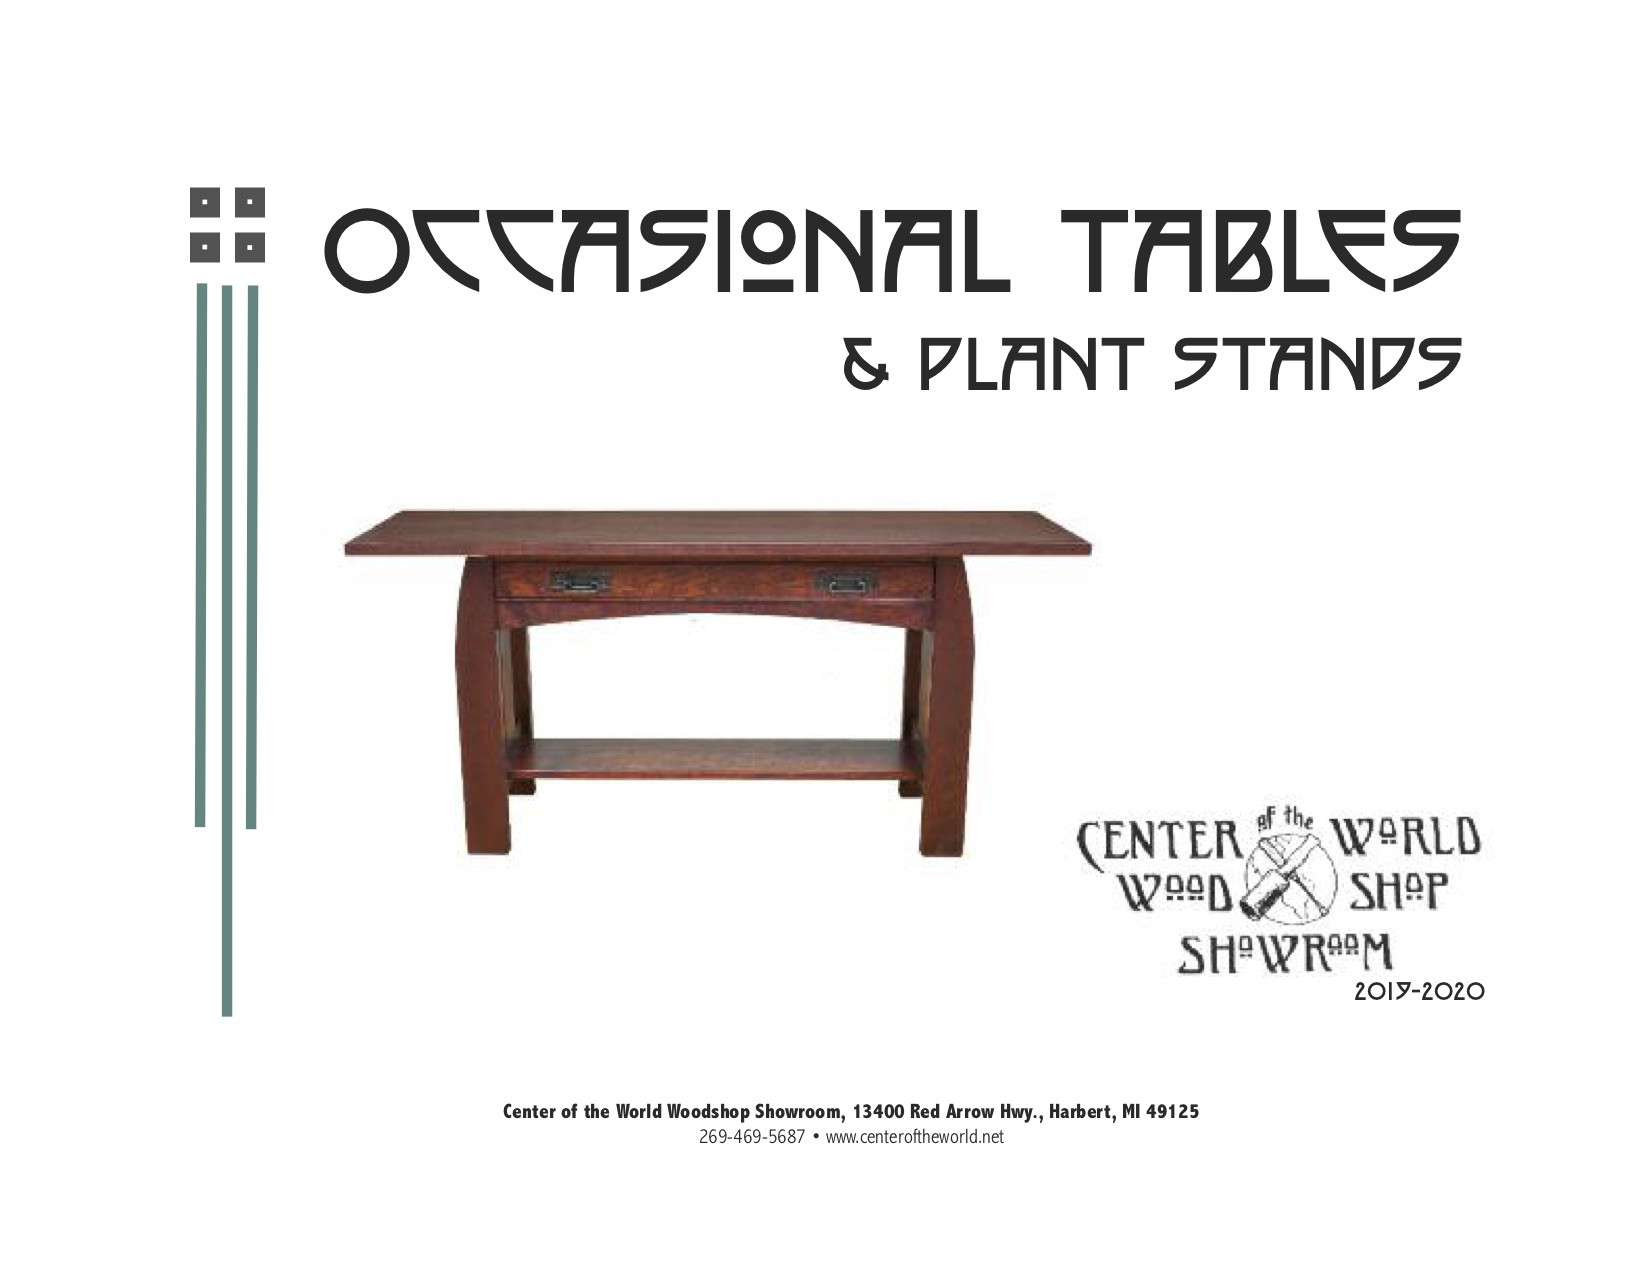 Occasional Table Catalog Cover 2019